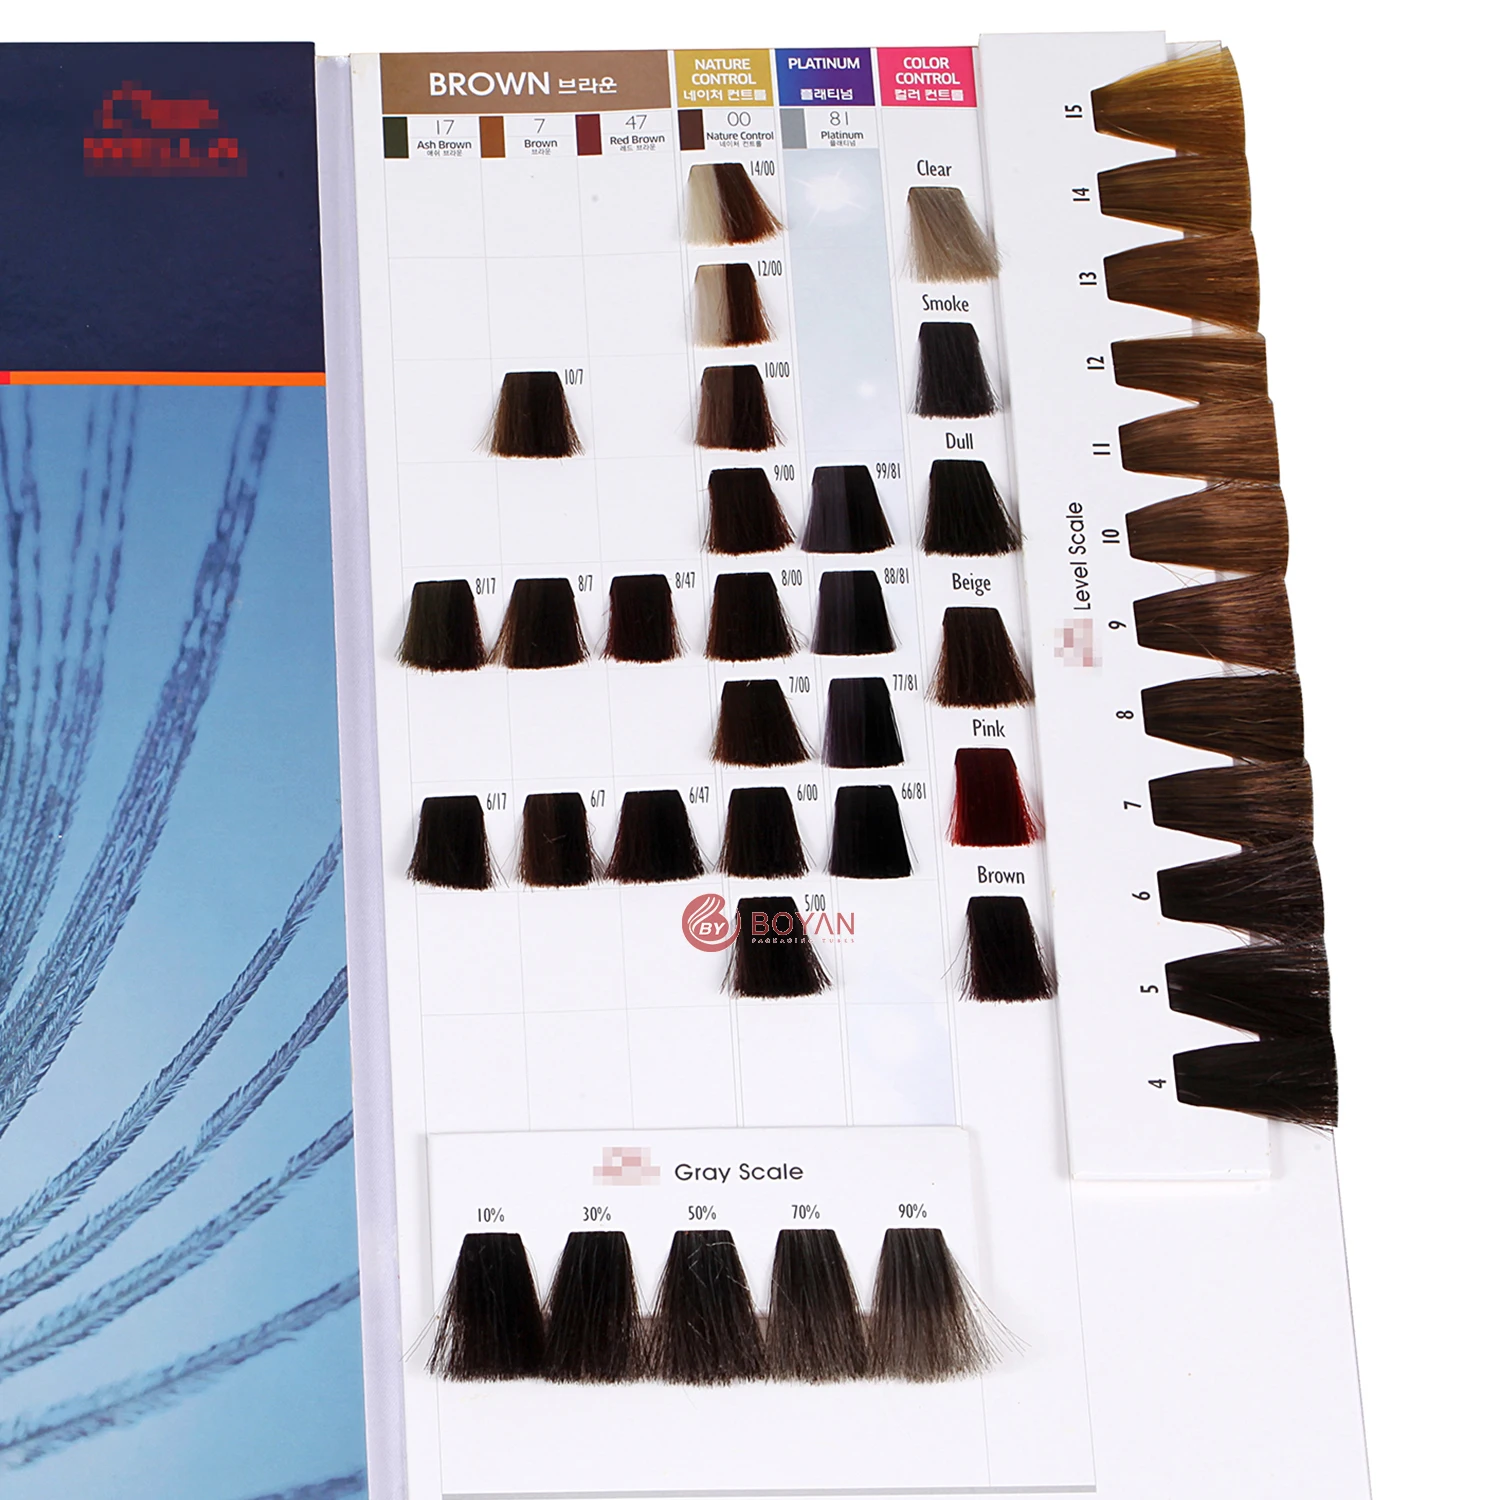 Boyan Hair Color Chart Manufacturer Hair Color Chart Professional - Buy Hair  Color Chart Manufacturer,Kenra Hair Color Chart,Hair Color Chart Keune  Product on 